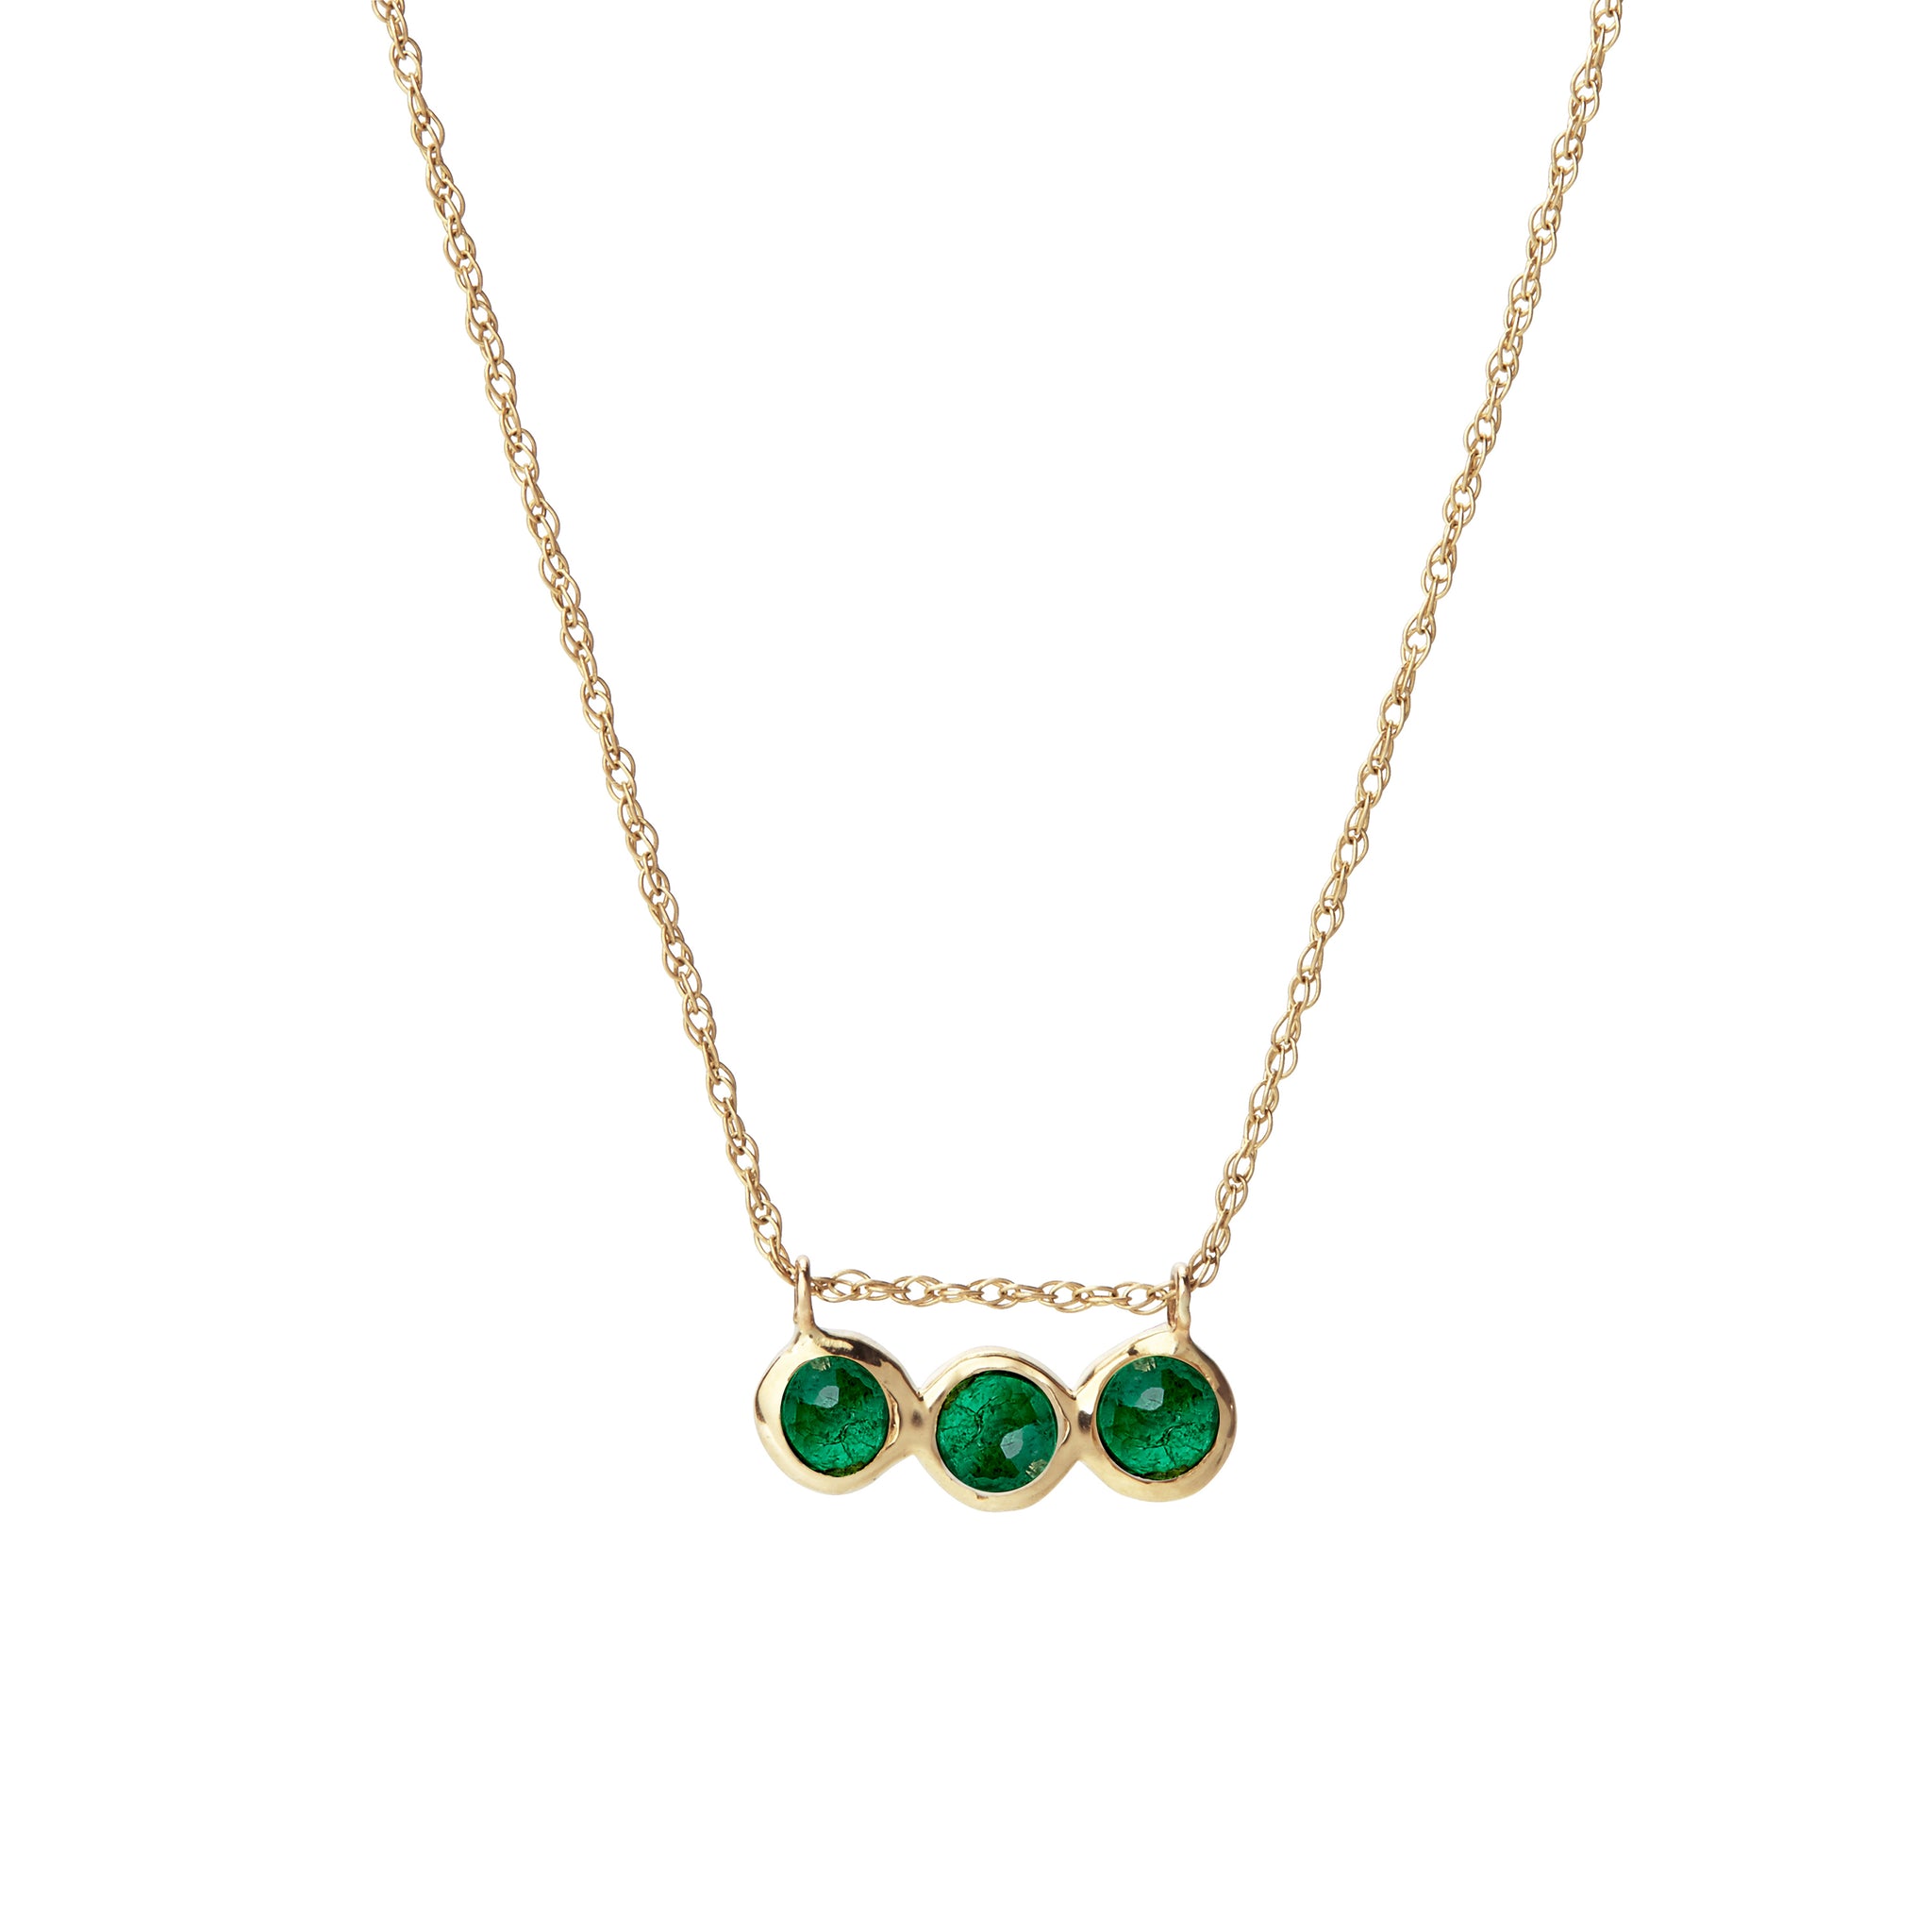 Emerald Necklace - Gardens of the Sun | Ethical Jewelry